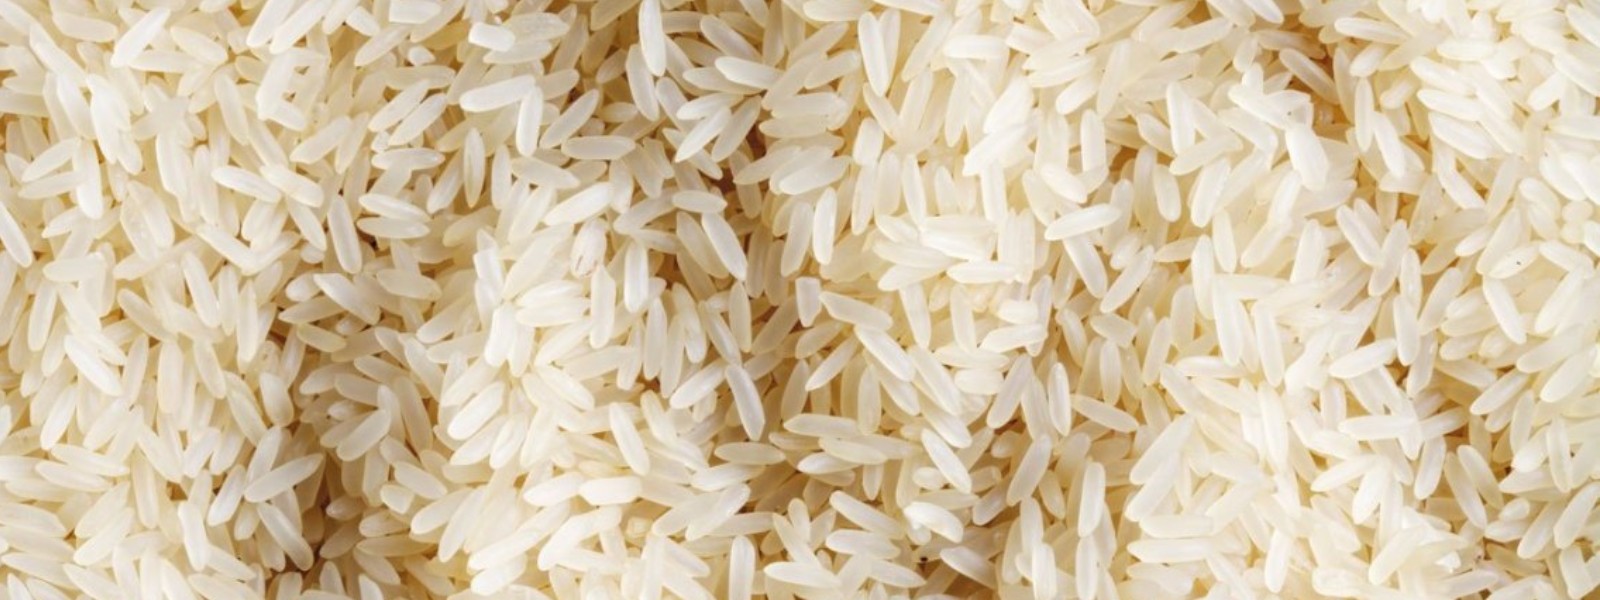 CBSL to release USD for clearance of Rice stocks at Colombo Port